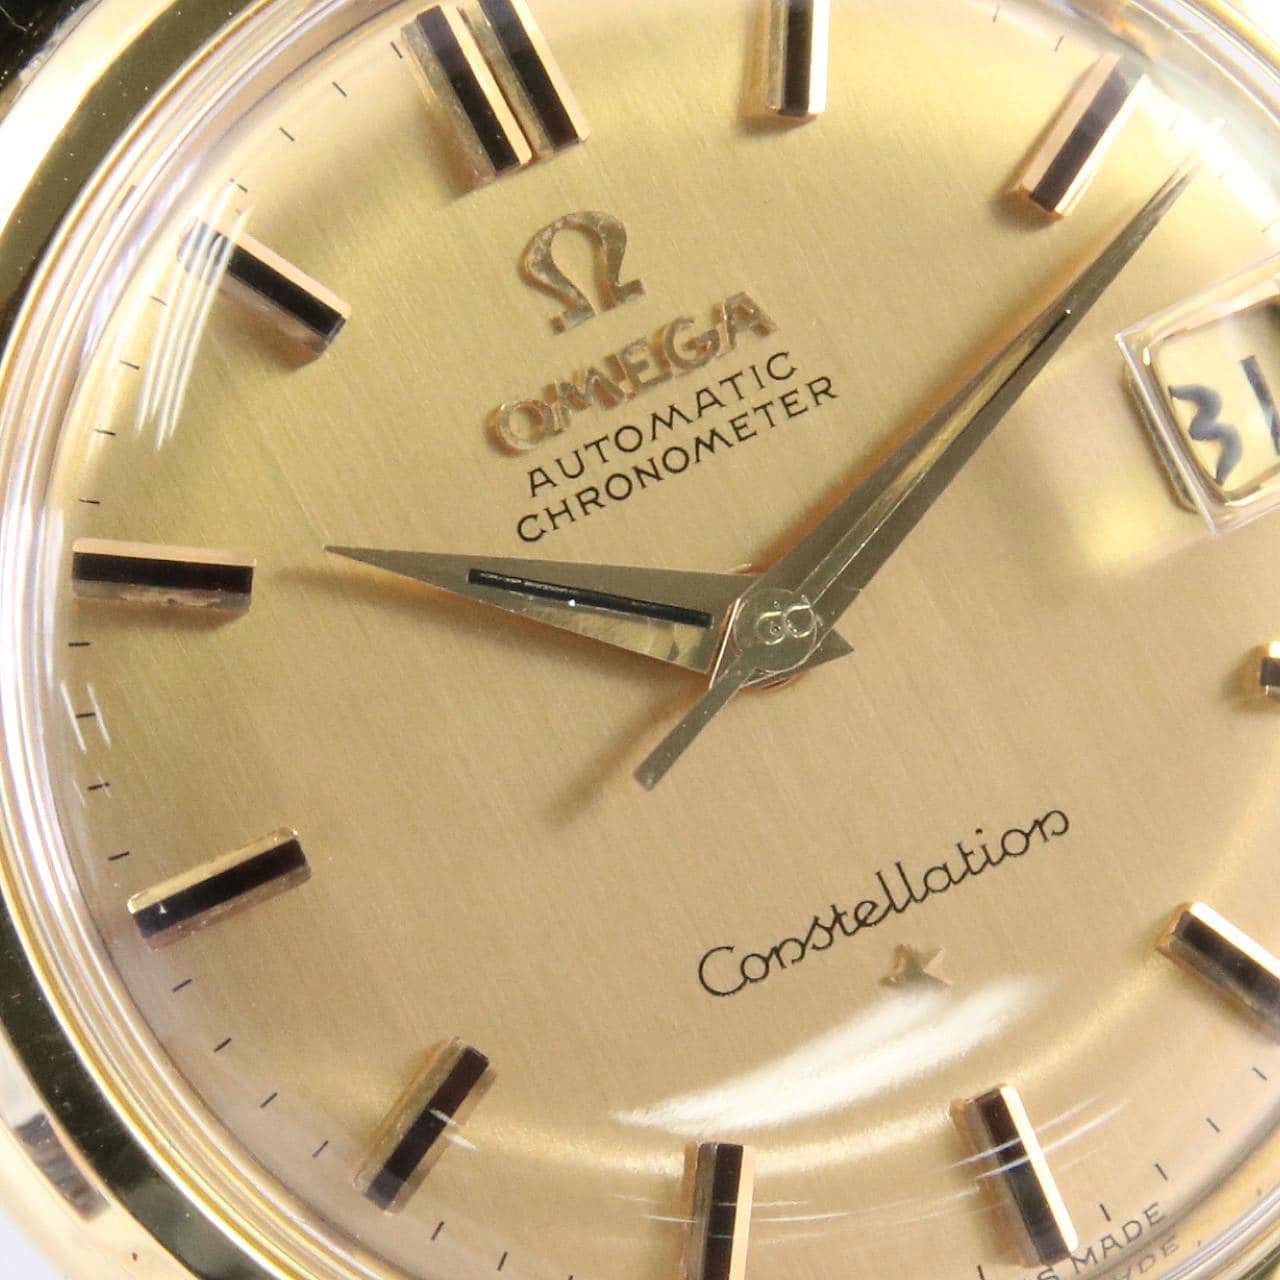 KOMEHYO|[VINTAGE] OMEGA Constellation CAL.561 YG 168.005/6 YG Automatic| OMEGA|Watchmen|CONSTELLATION|【Official】Japan's largest reuse department  store KOMEHYO